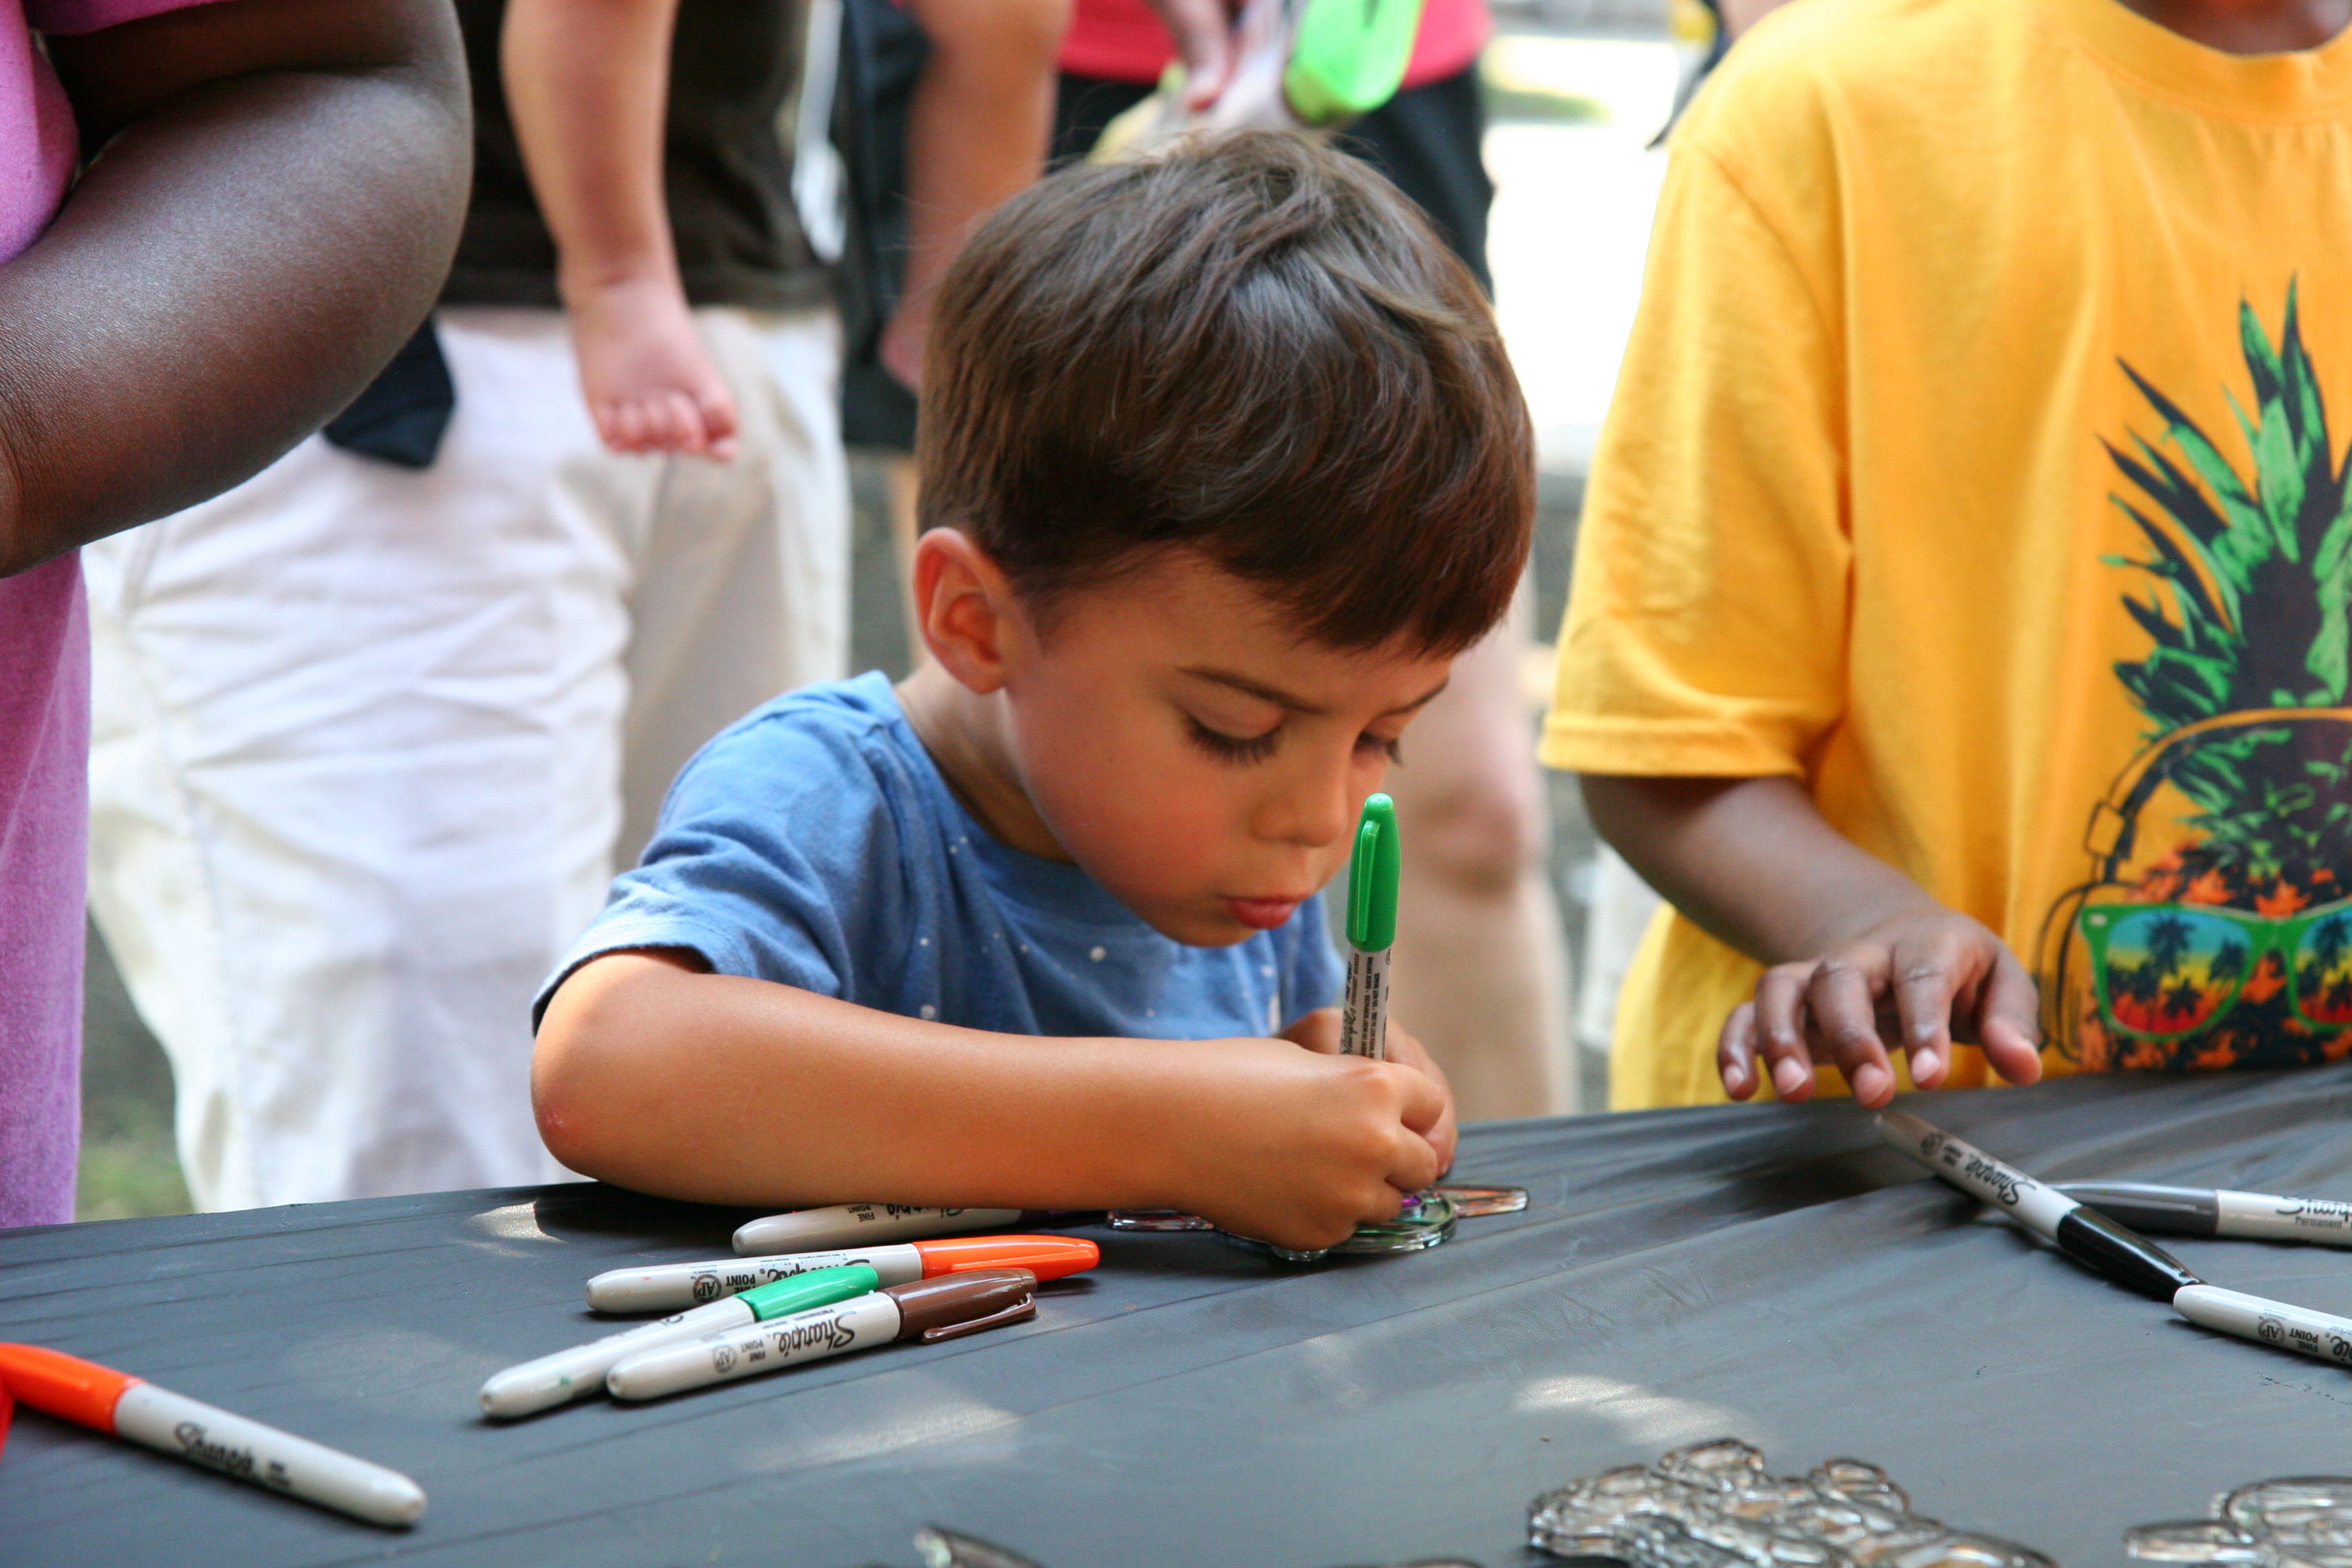 Young boy at the craft station